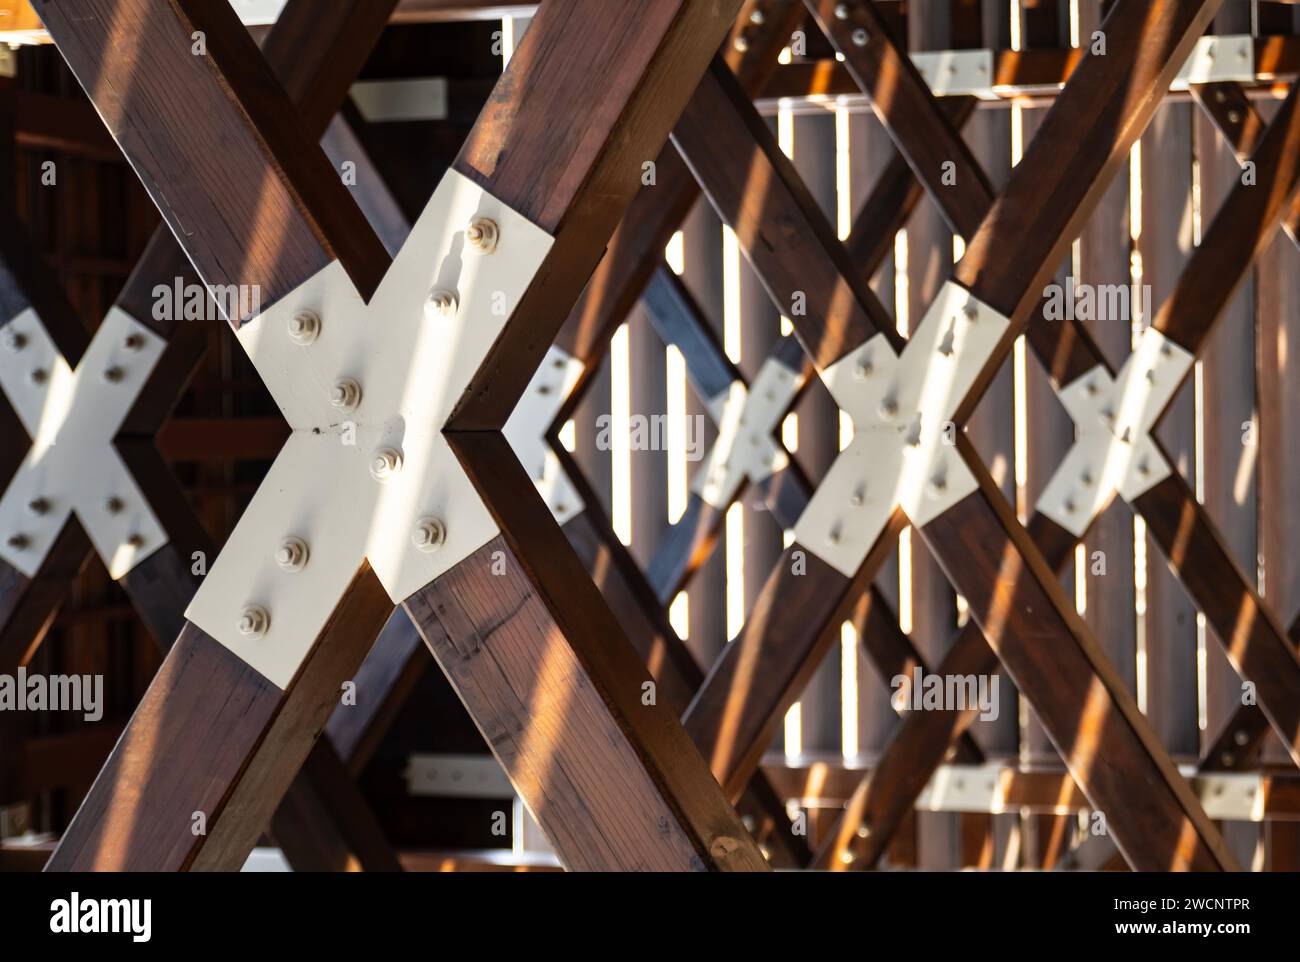 Virtual interior decoration made of wood and steel Stock Photo